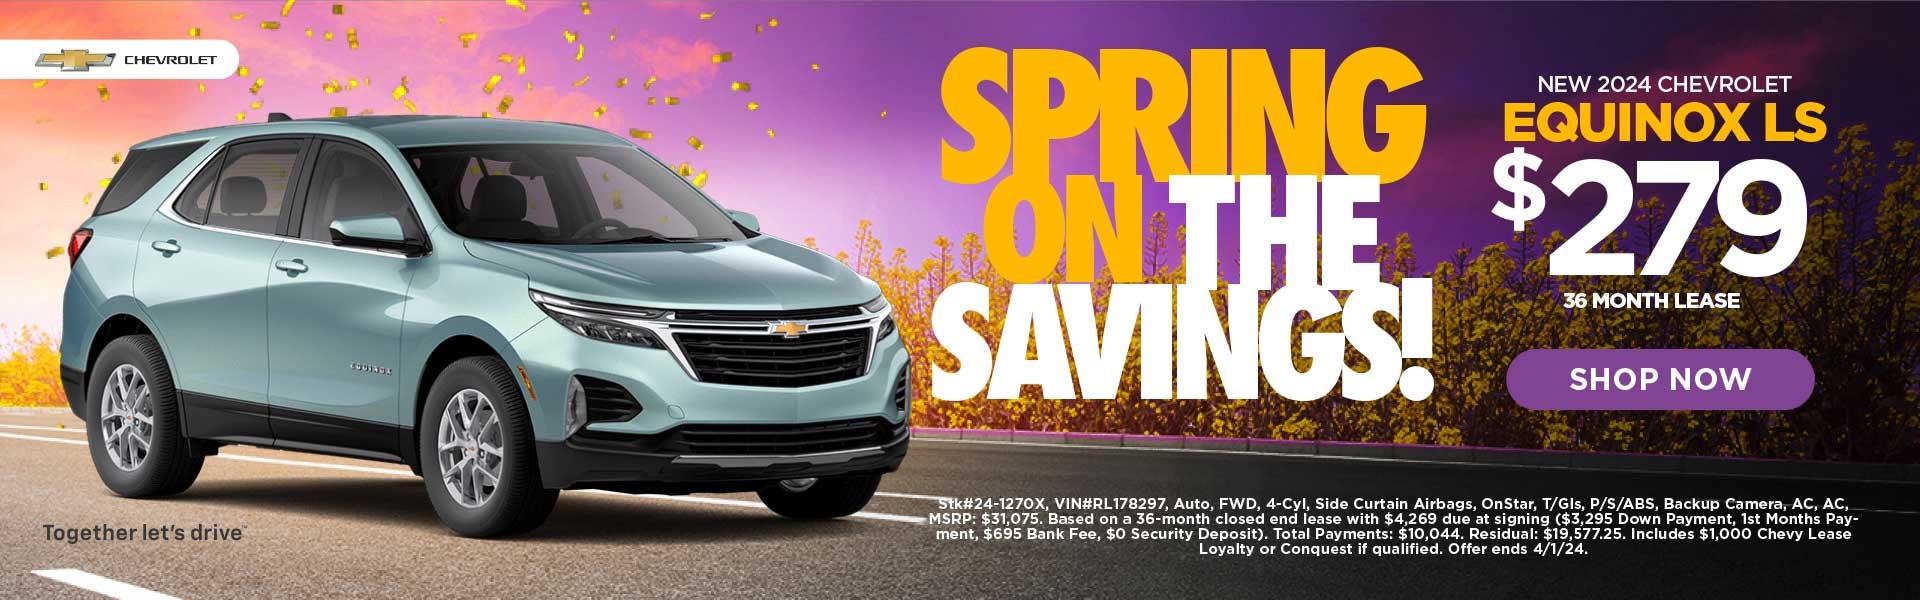 New 2024 Chevrolet Equinox LS $279/36 Month Lease 